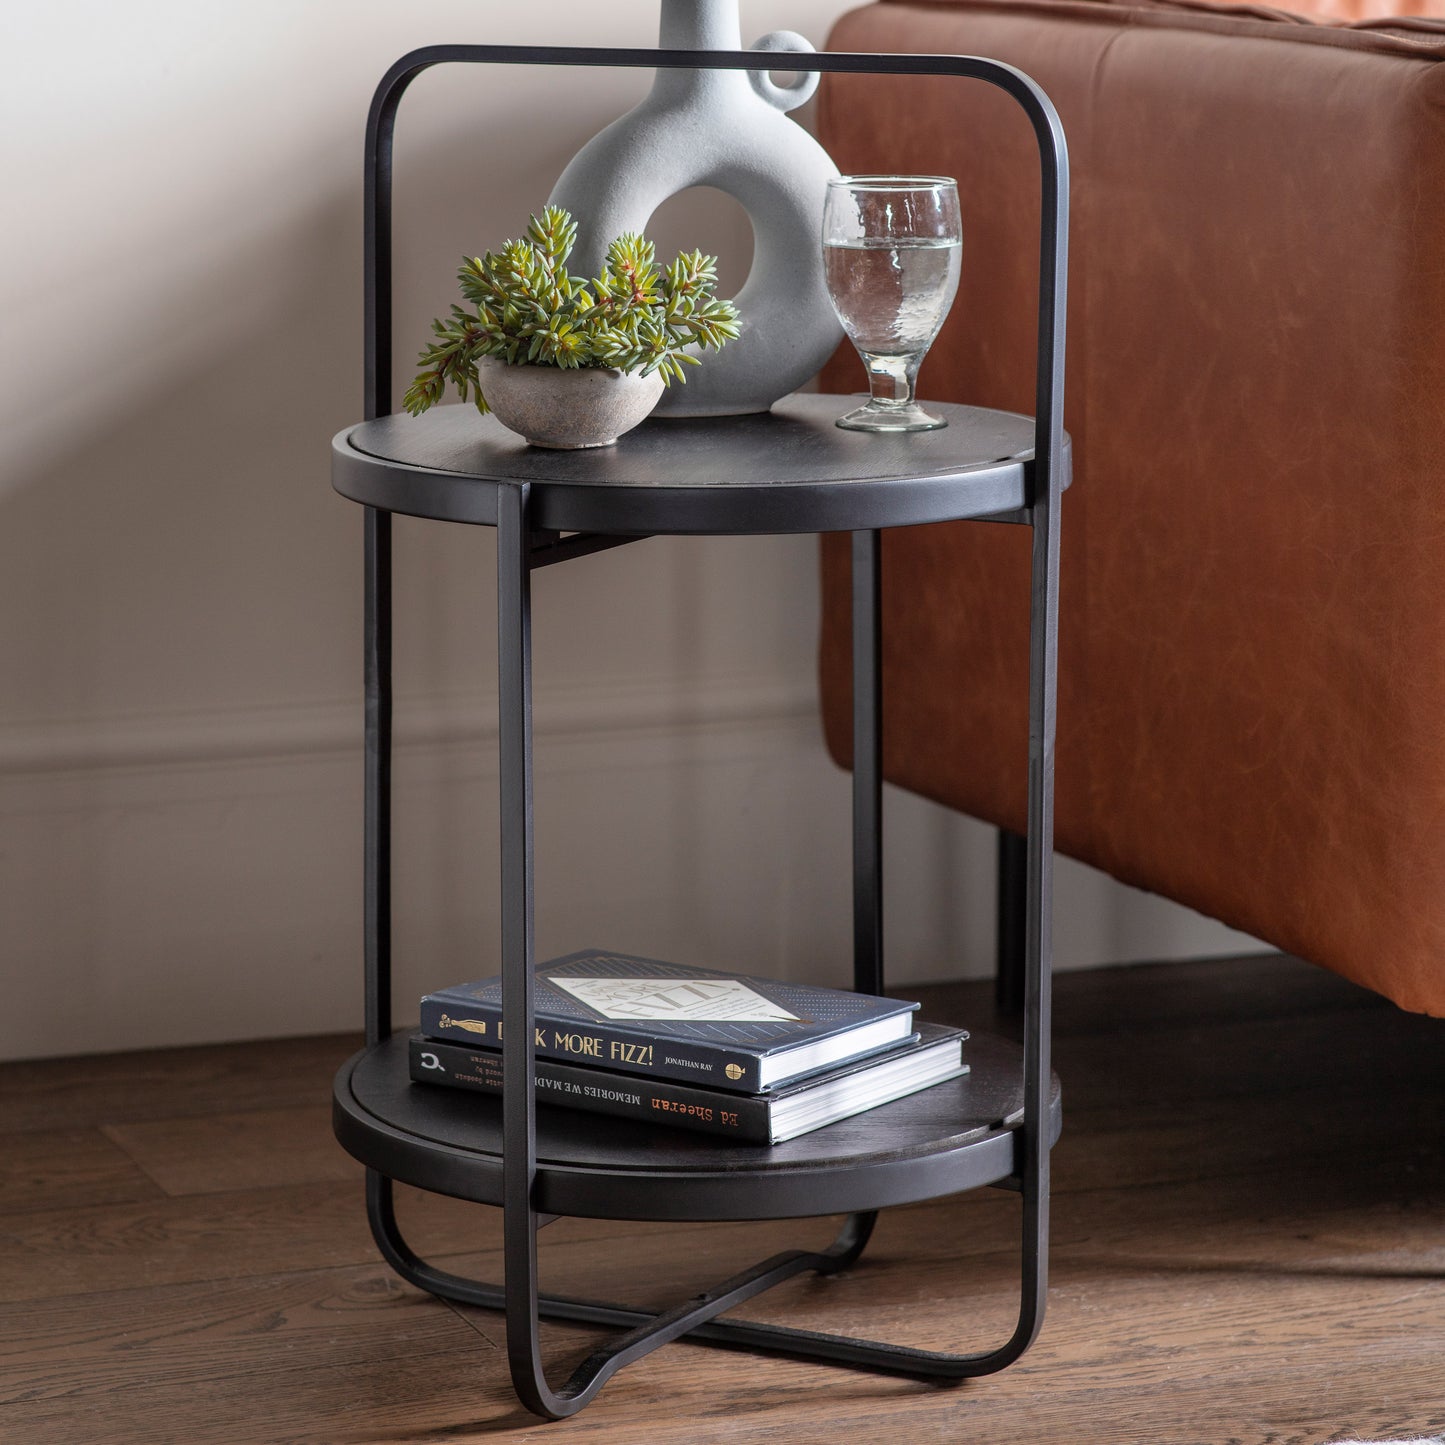 A Kikiathome.co.uk Lutton Side Table Black 425x425x720mm with a vase and books - perfect home furniture for interior decor.